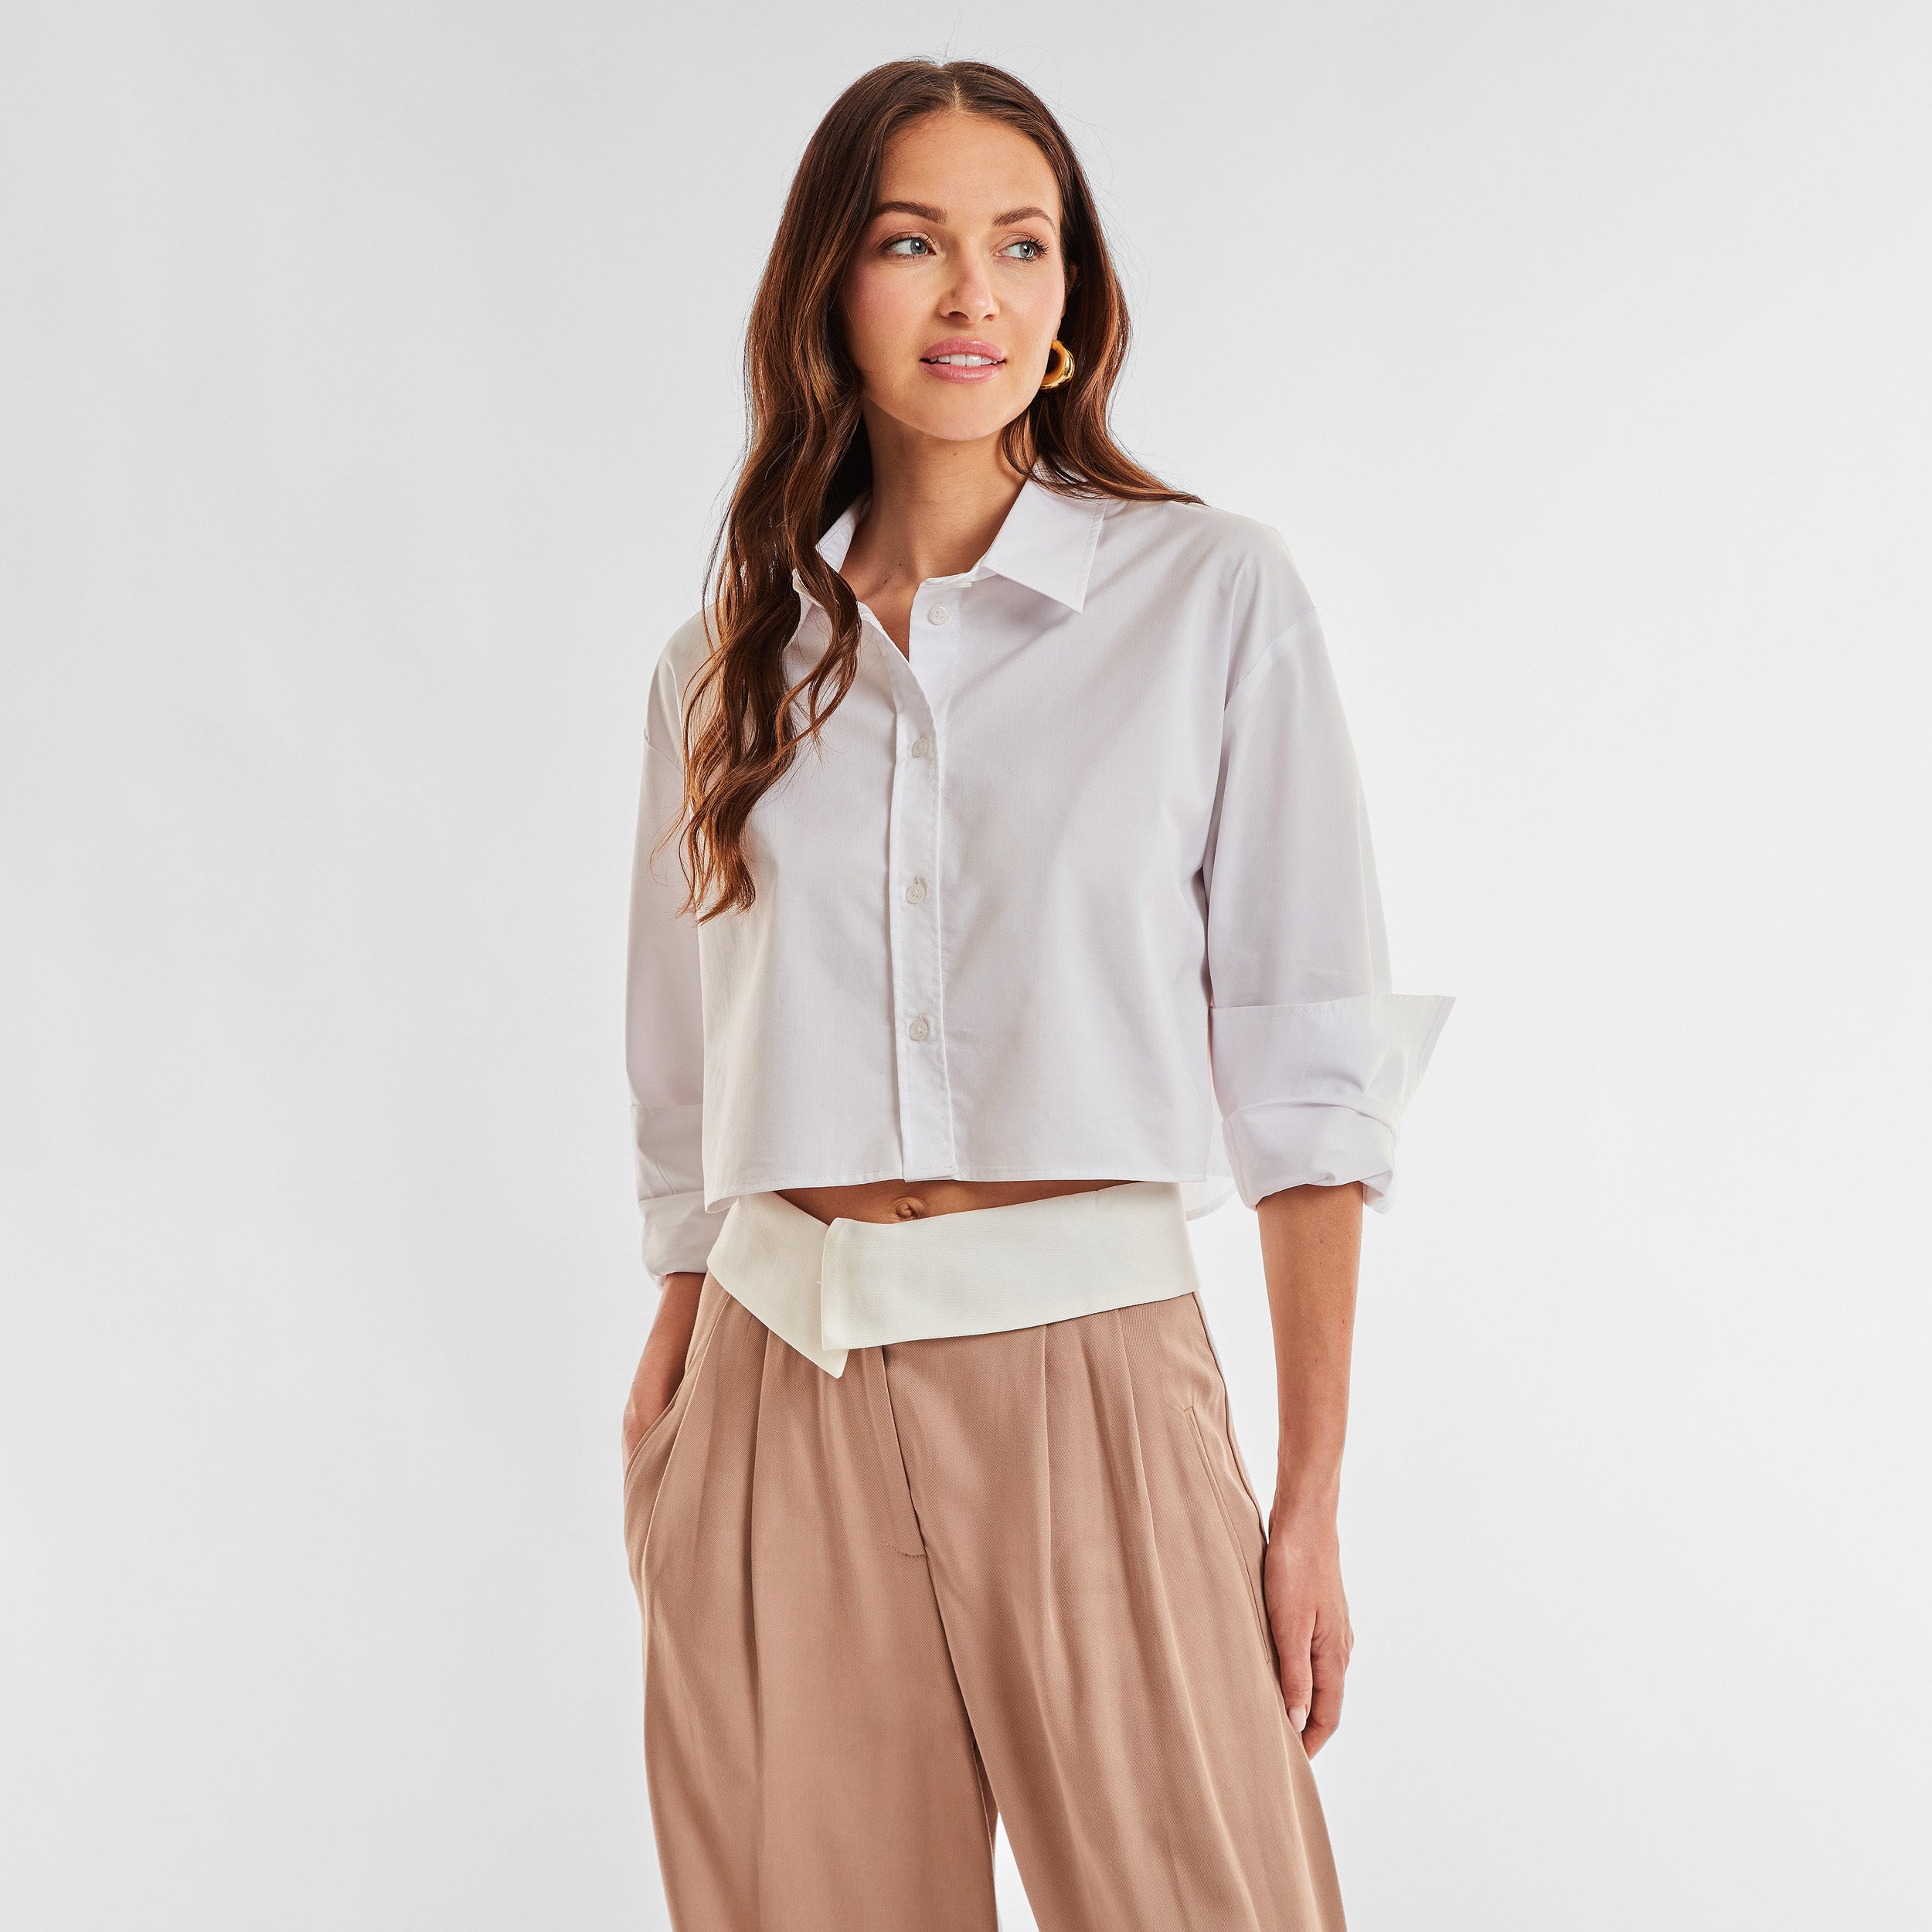 Front view of woman wearing a cropped white buttonup shirt and foldover waist mocha colored pant